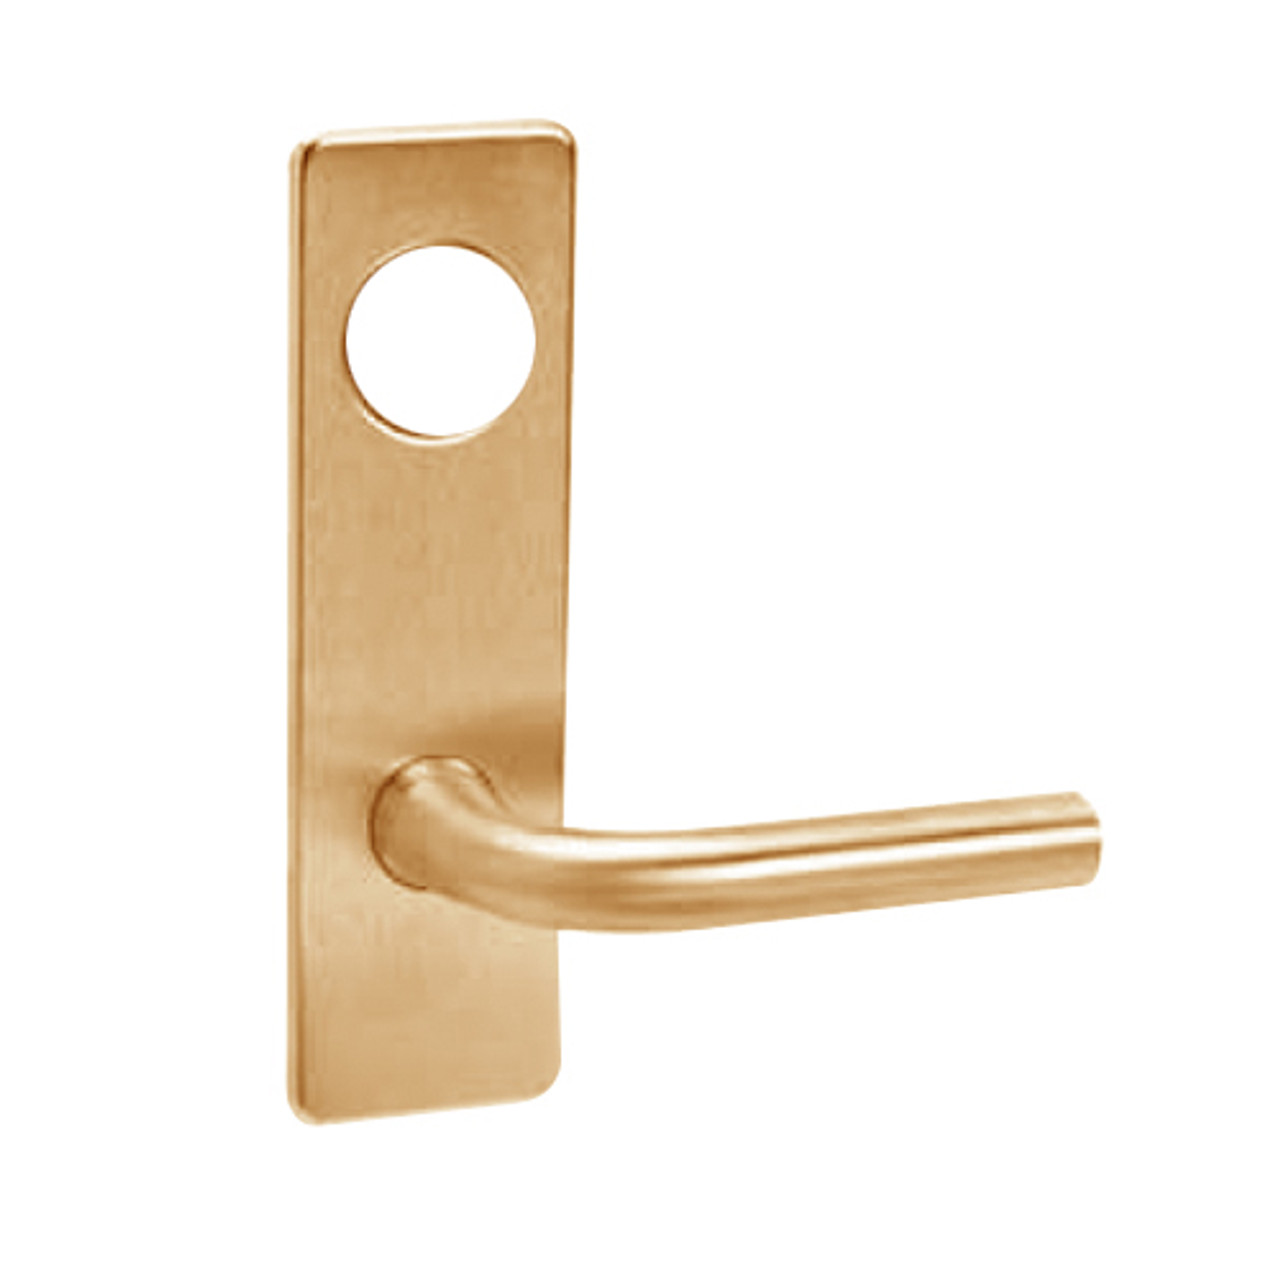 ML2032-RSM-612-CL7 Corbin Russwin ML2000 Series IC 7-Pin Less Core Mortise Institution Locksets with Regis Lever in Satin Bronze